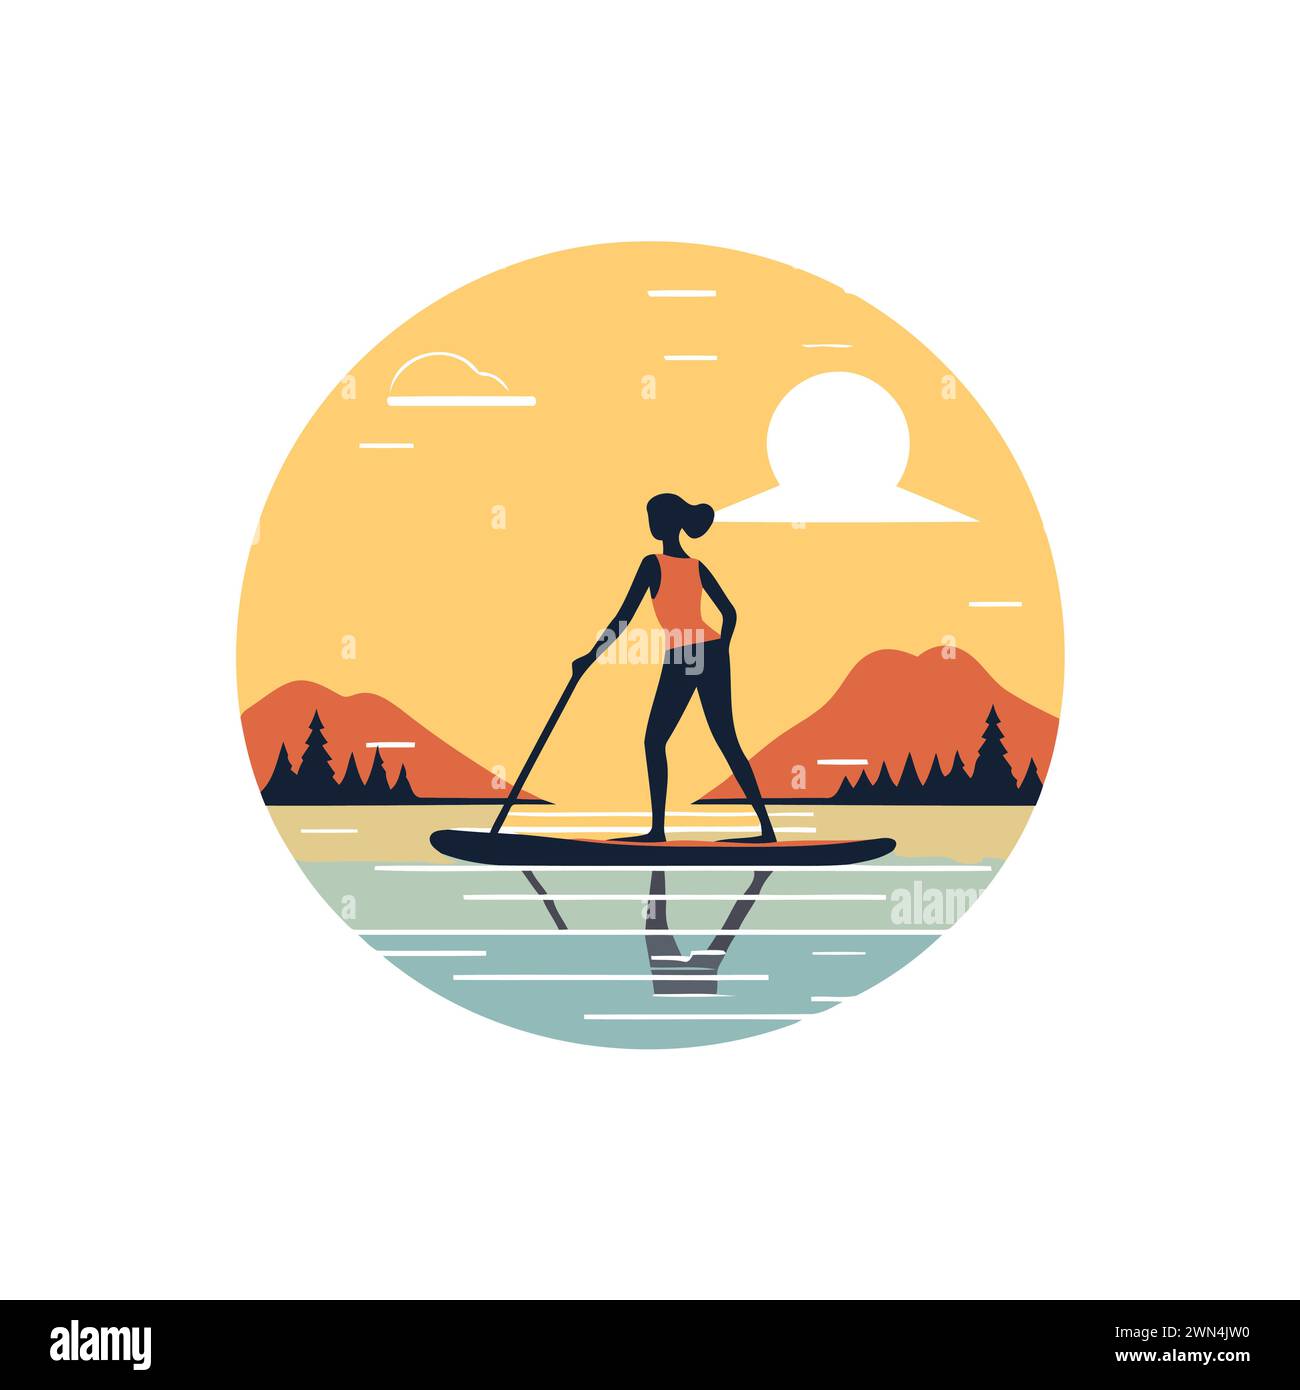 Woman on stand up paddle board. Vector illustration in flat style. Stock Vector